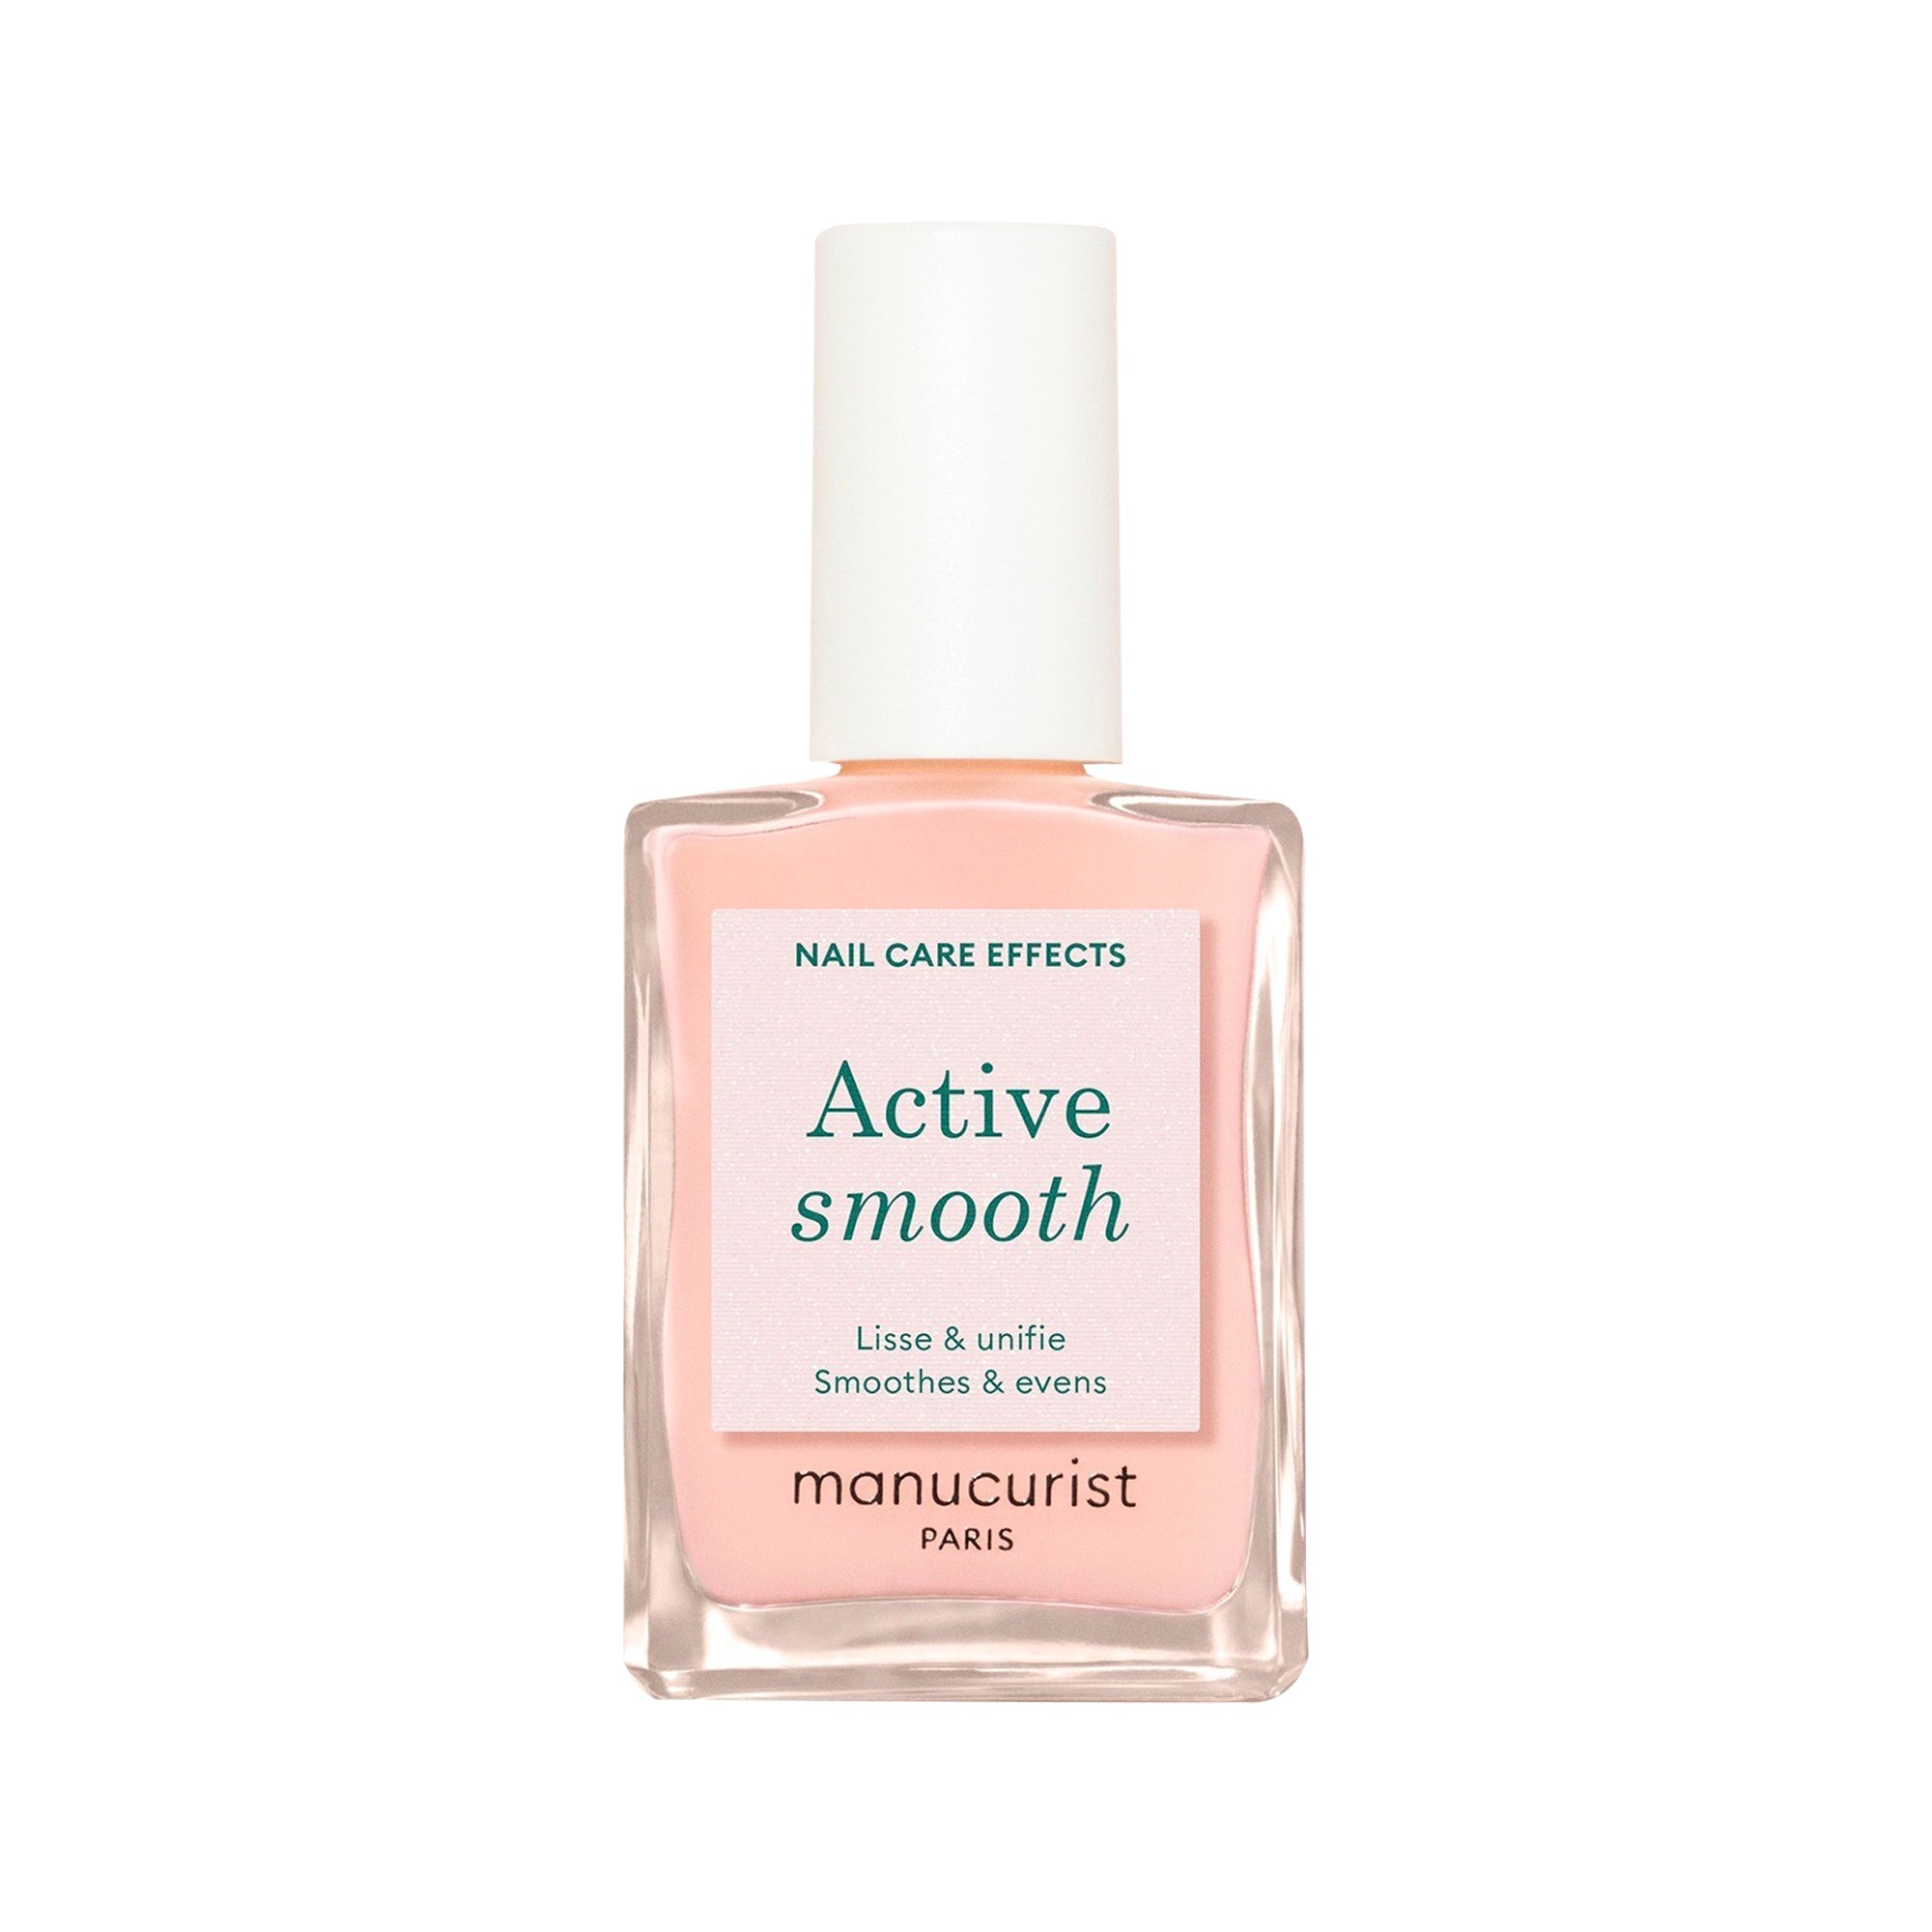 Active Smooth – Vernis soin lissant Active Smooth – Vernis soin lissant - Manucurist